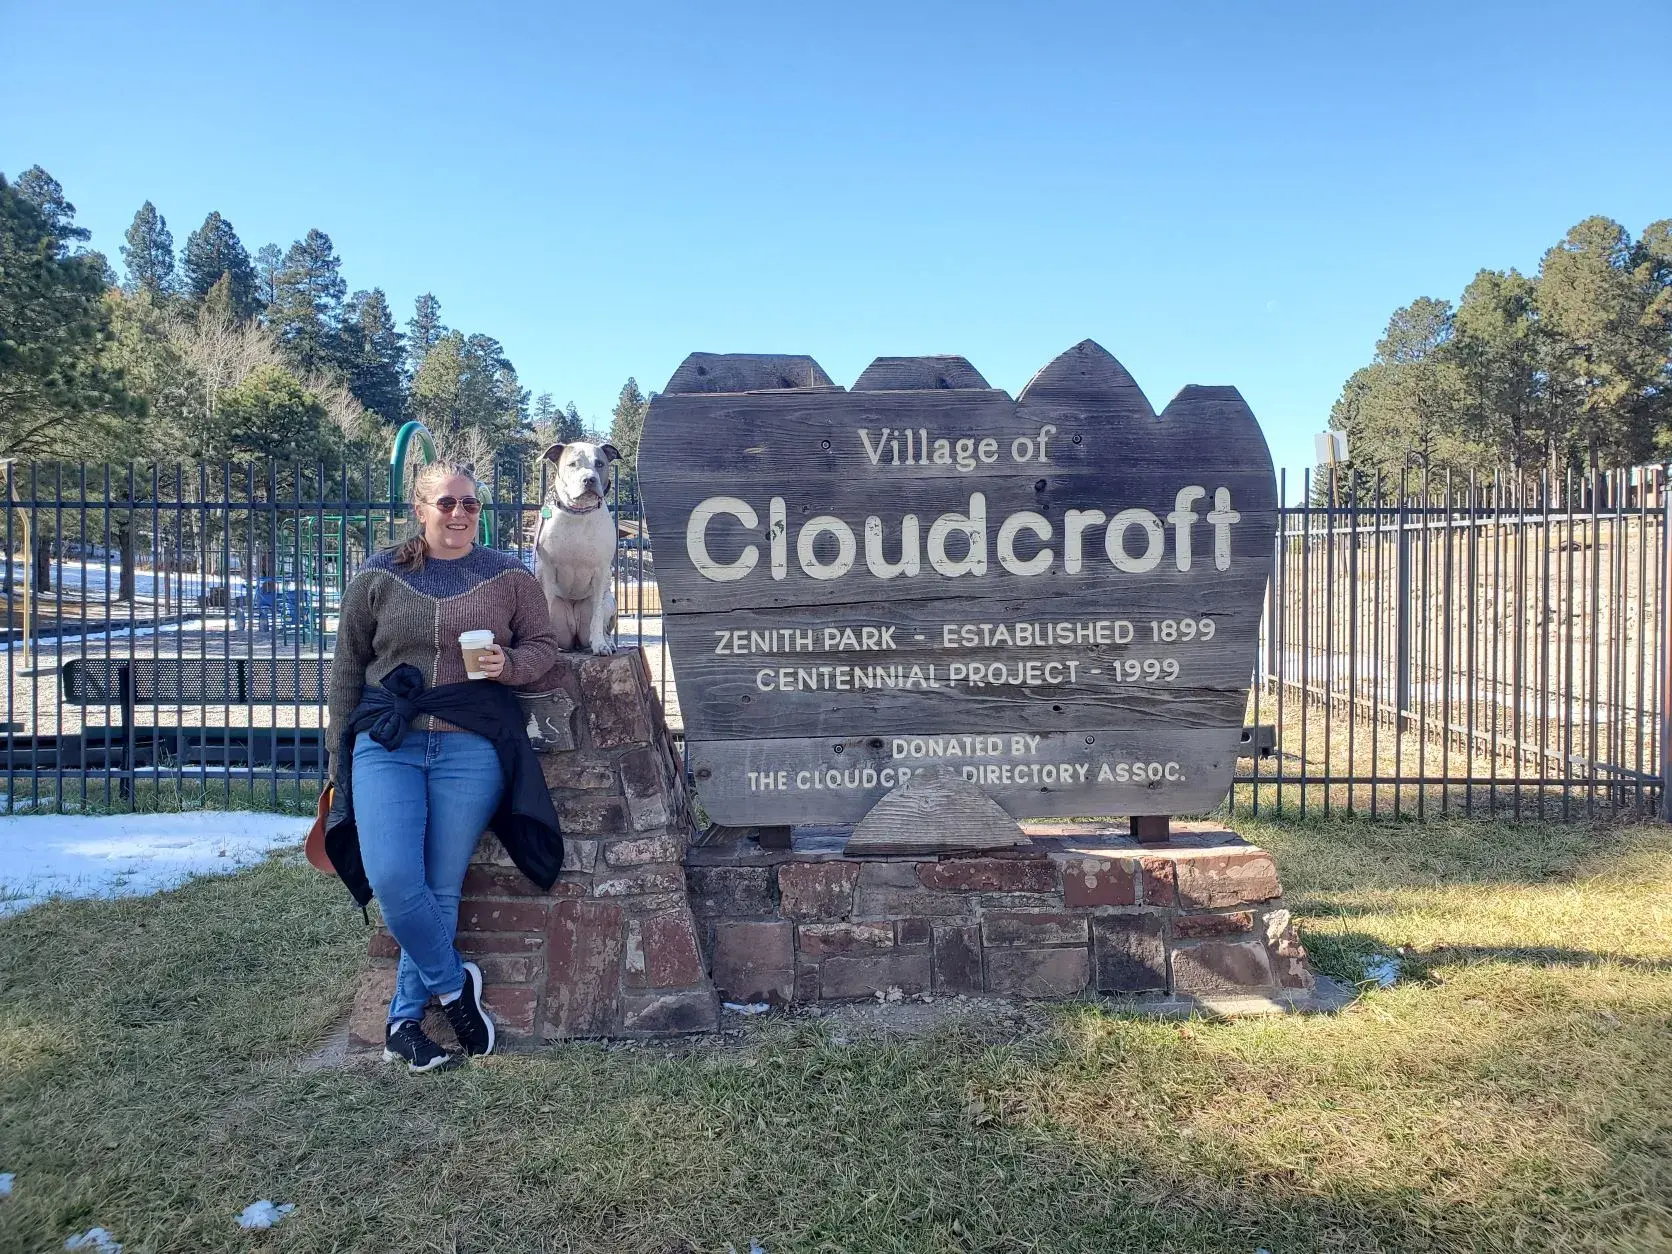 Things to do in Cloudcroft